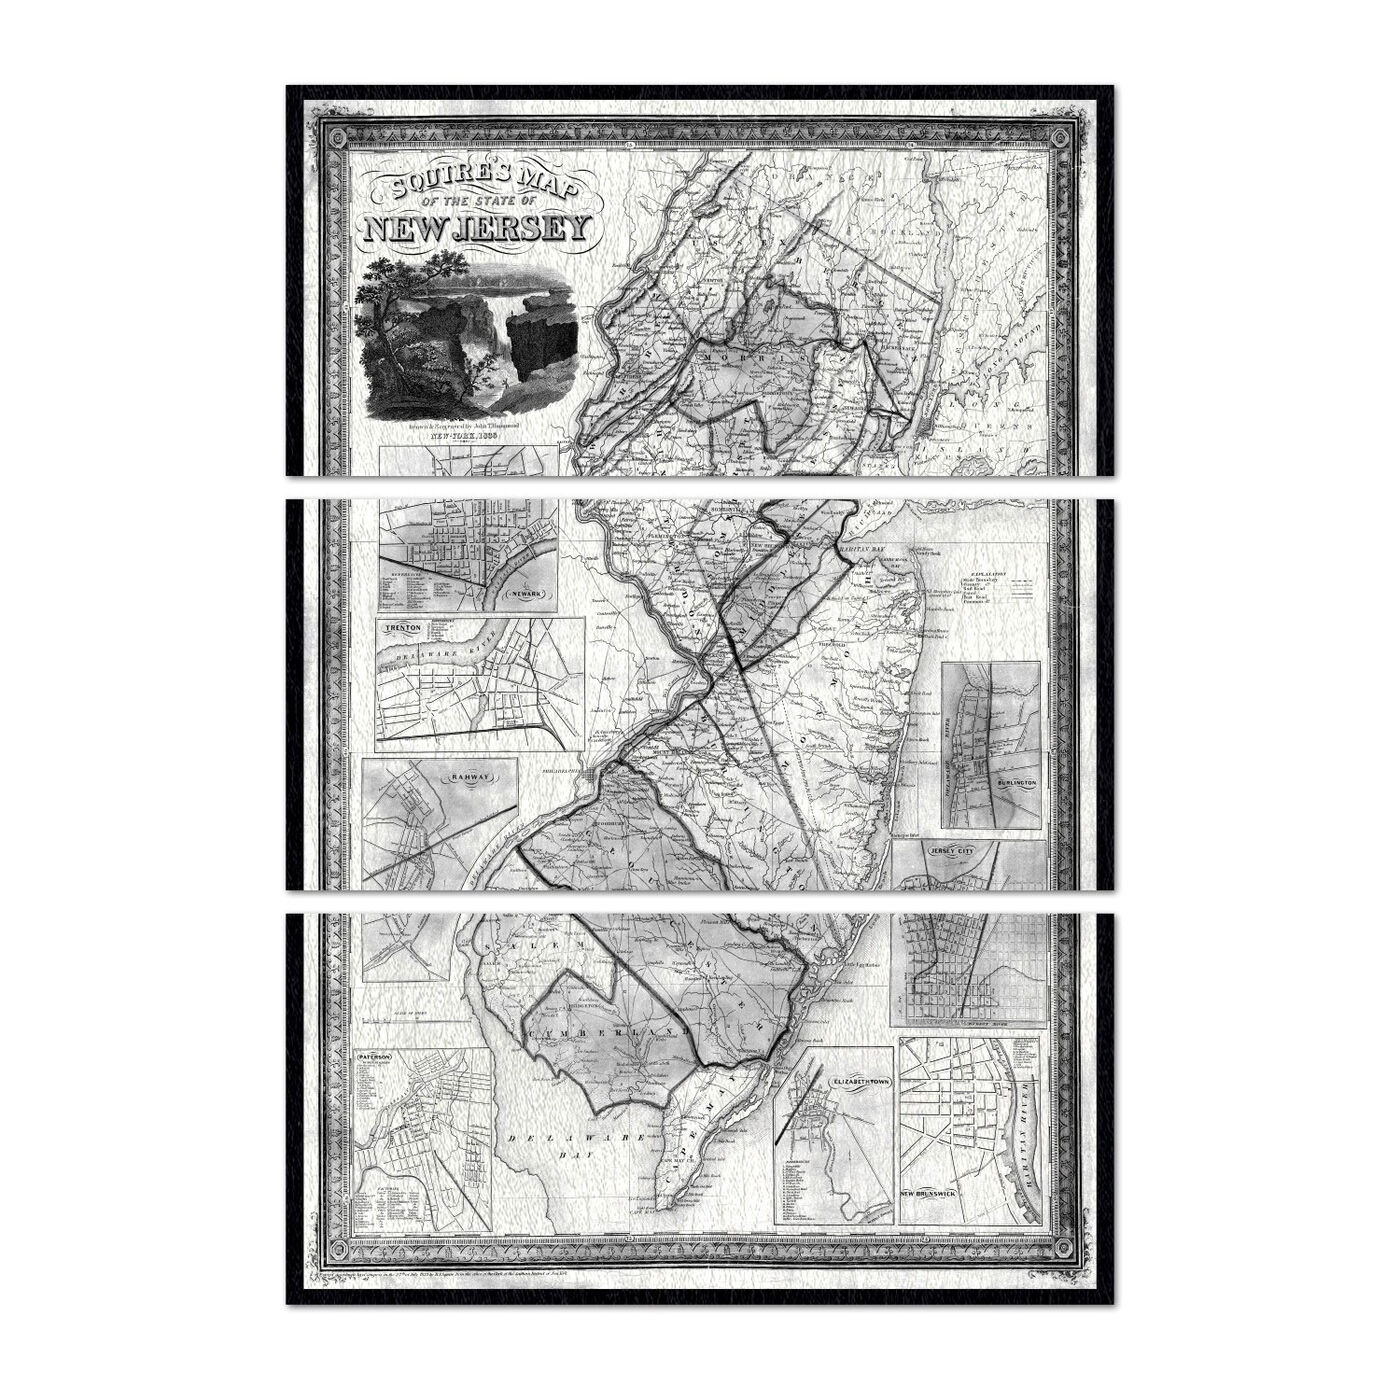 Squire's Map of New Jersey 1836 Triptych